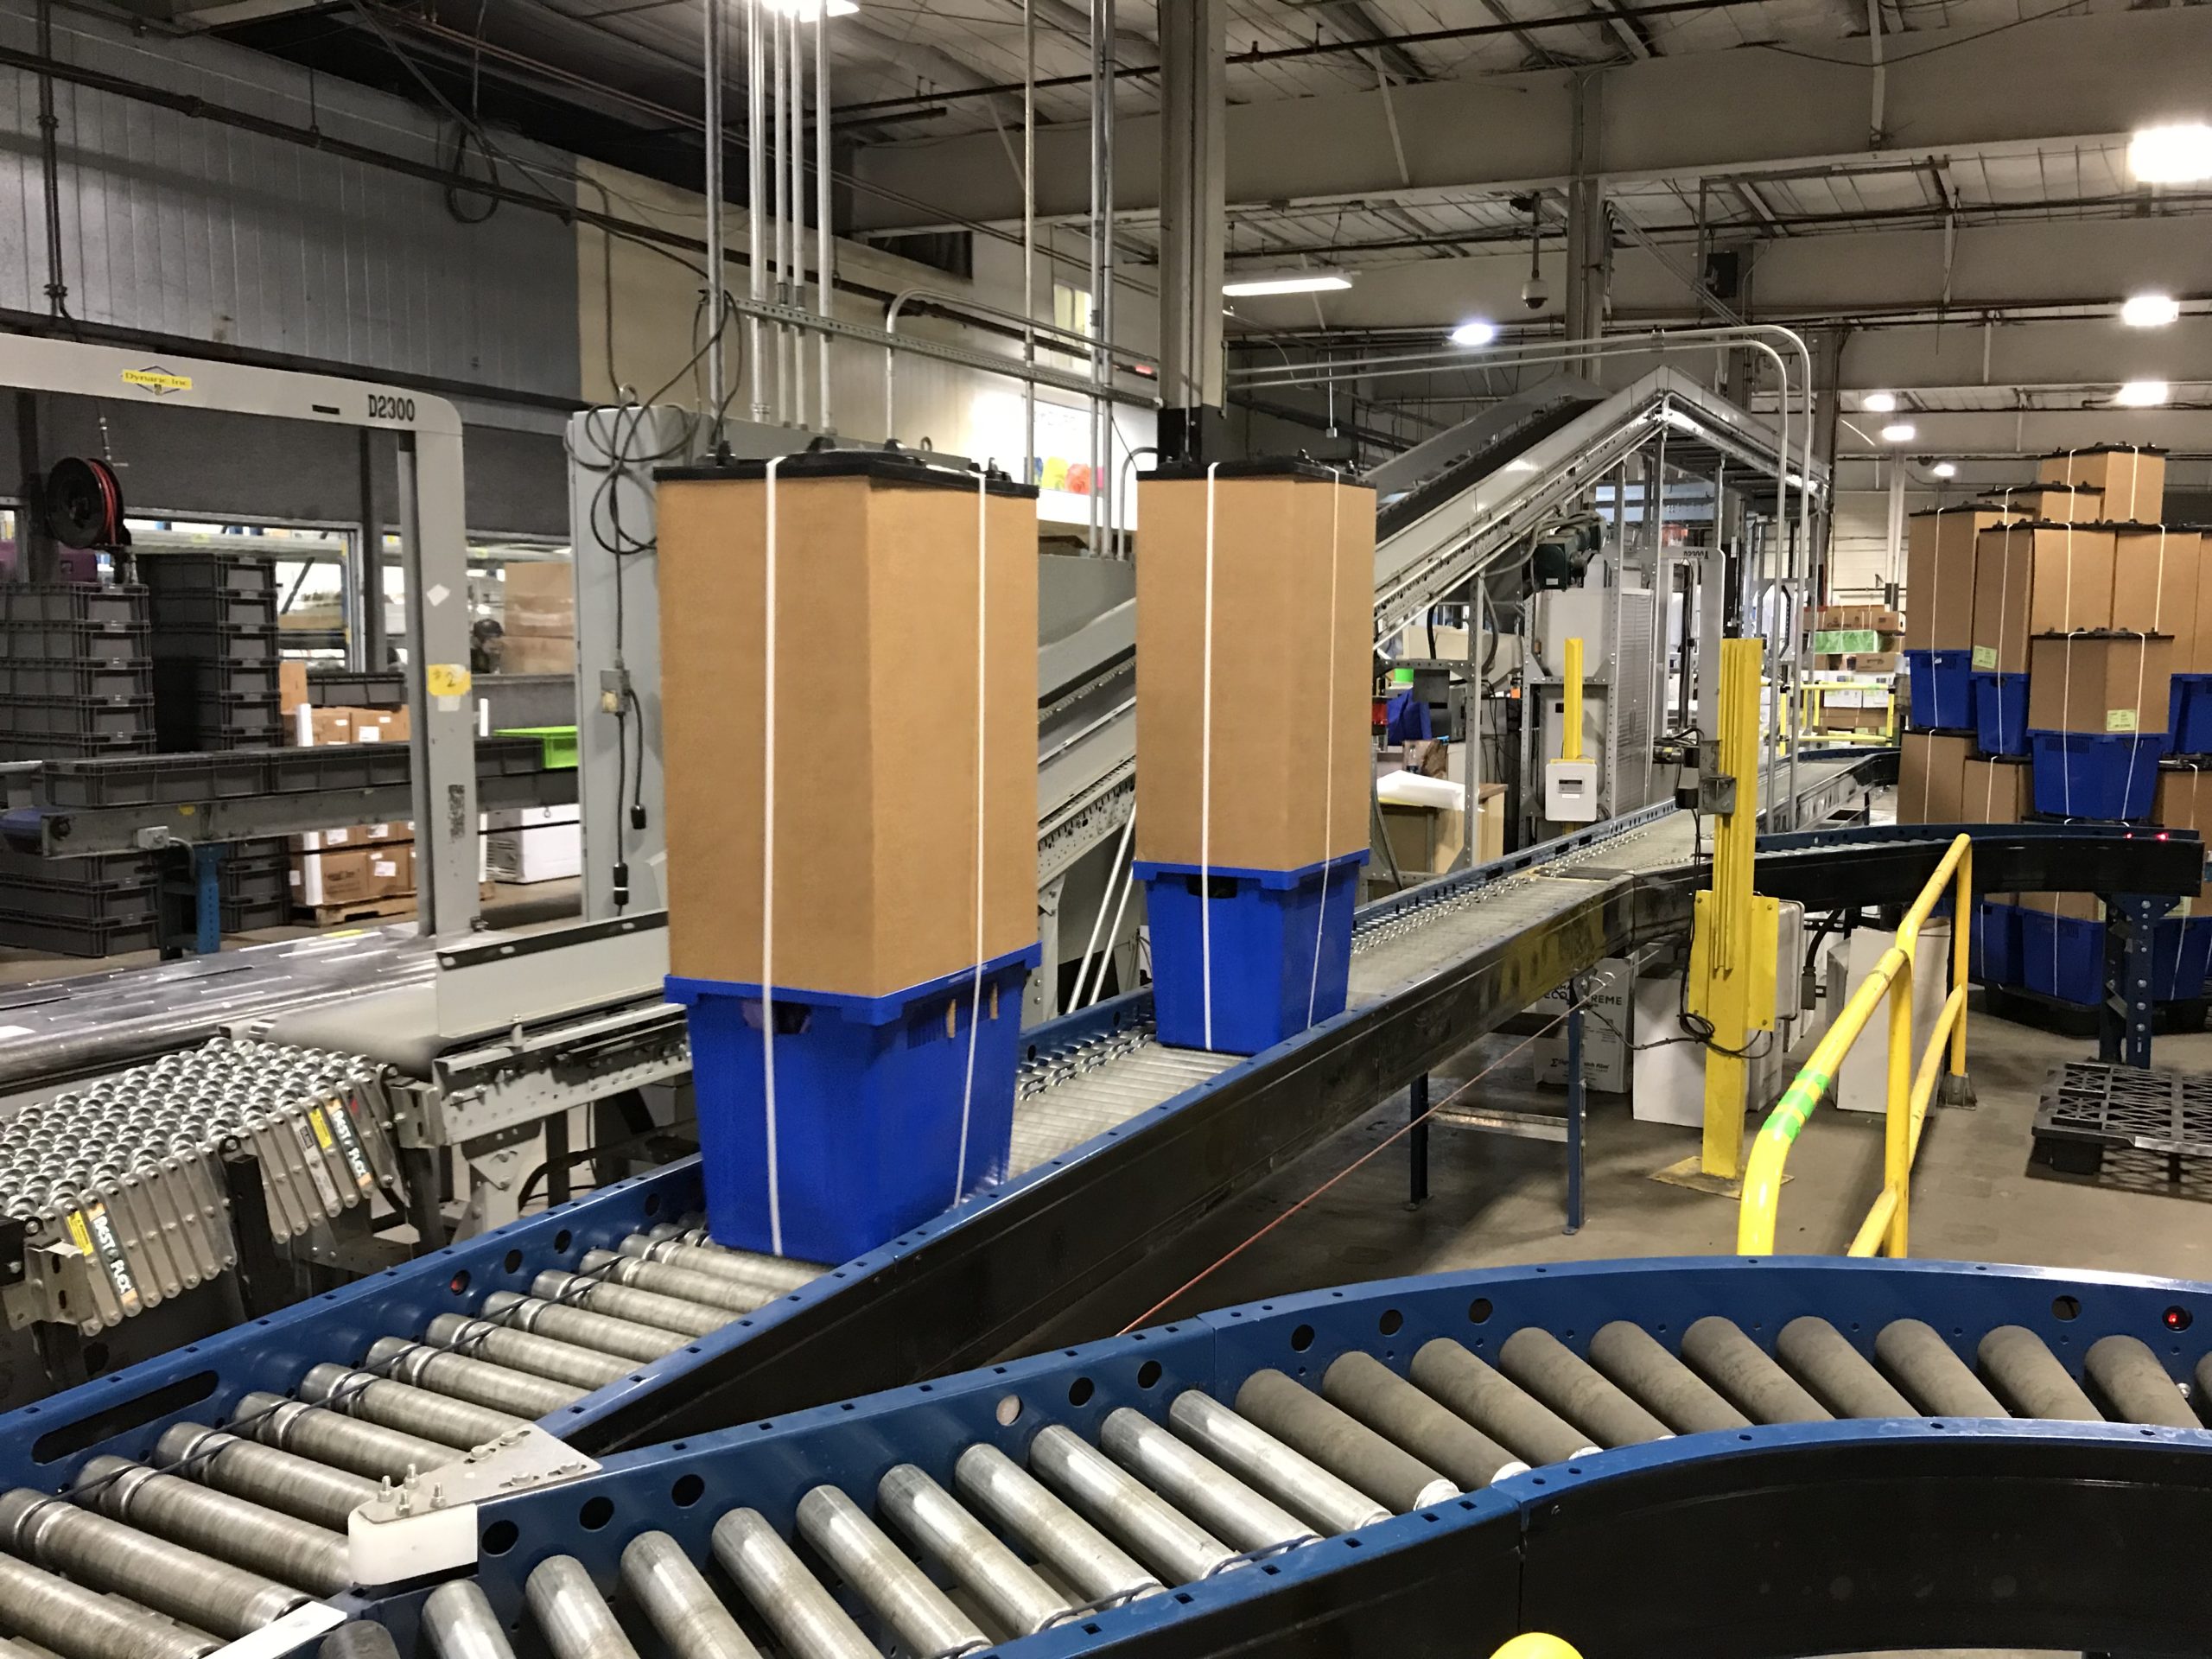 Conveyor Lines with Totes